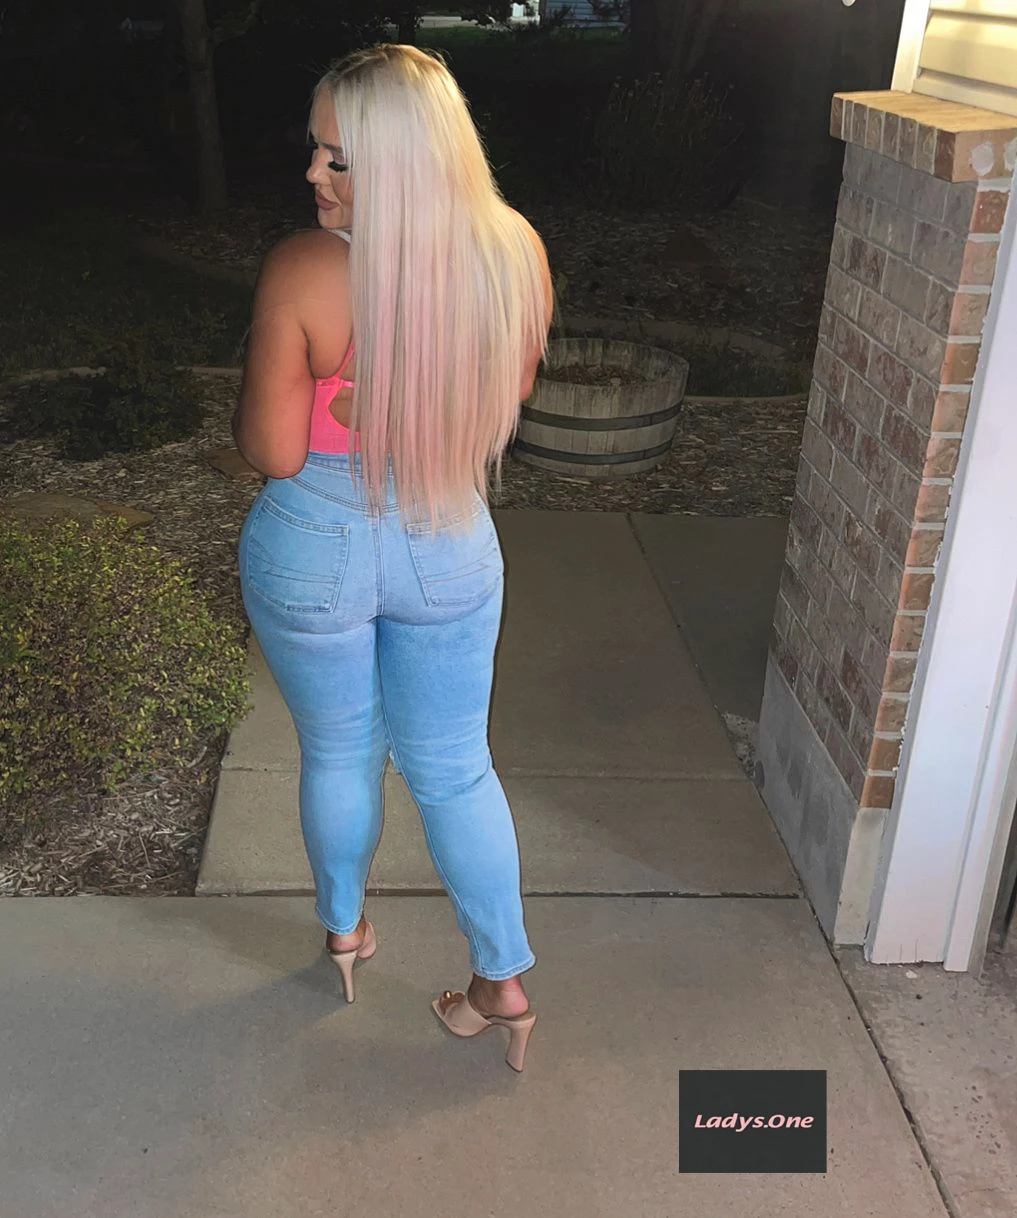 Chrissy, 20 years BBW escorts girl, height 162 sm, Weight 59 kg, backpage Salt Lake City